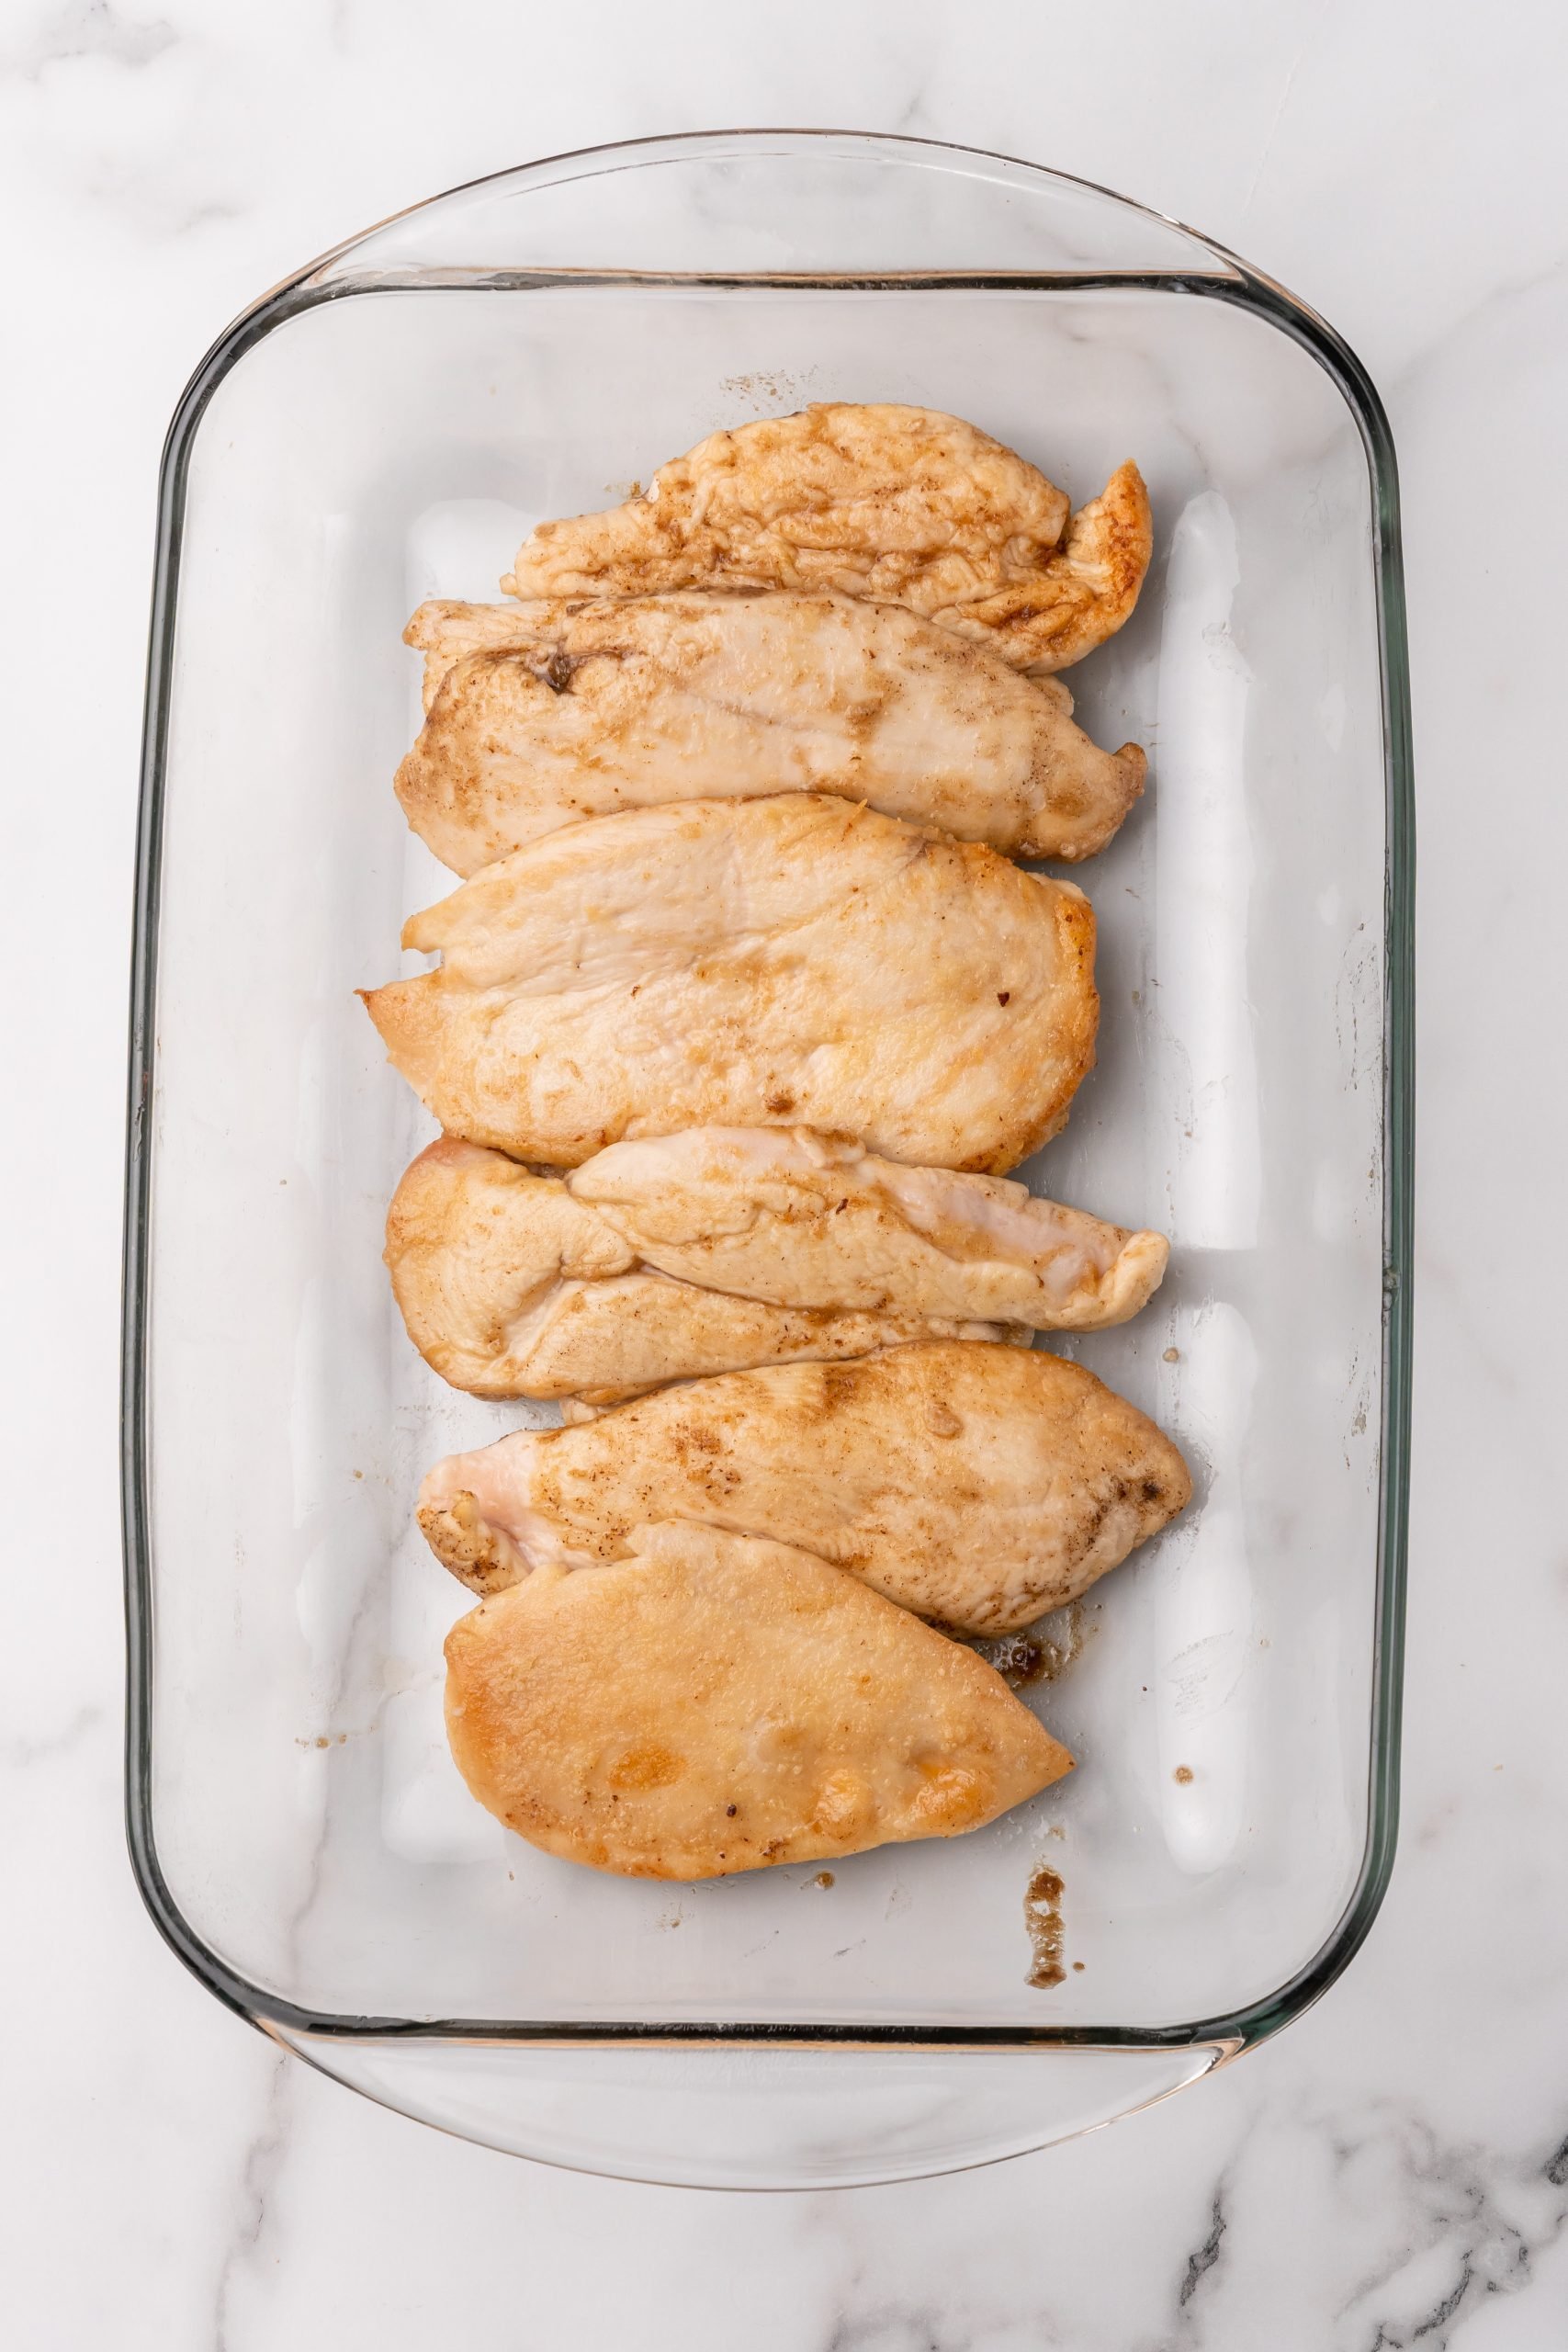 pan fried chicken breasts arranged in a glass baking dish